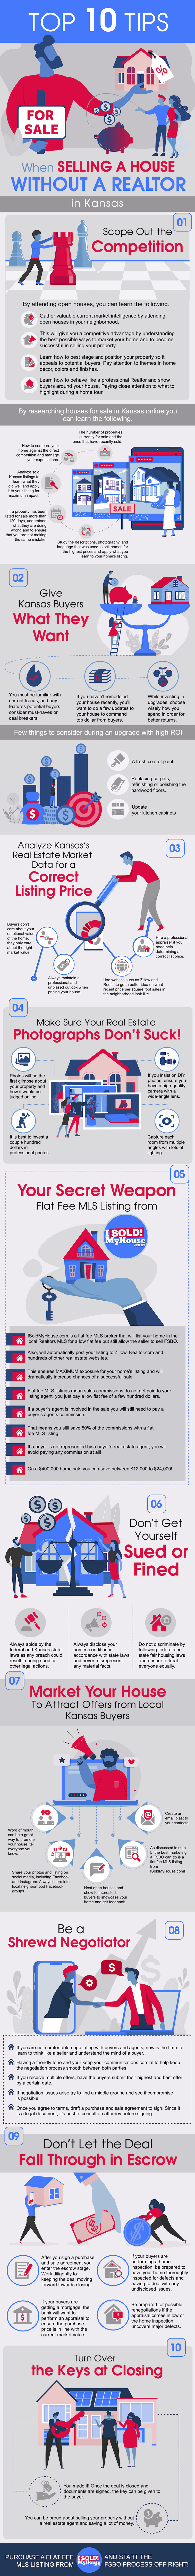 infographic of the 10 steps to sell a house in kansas without an agent